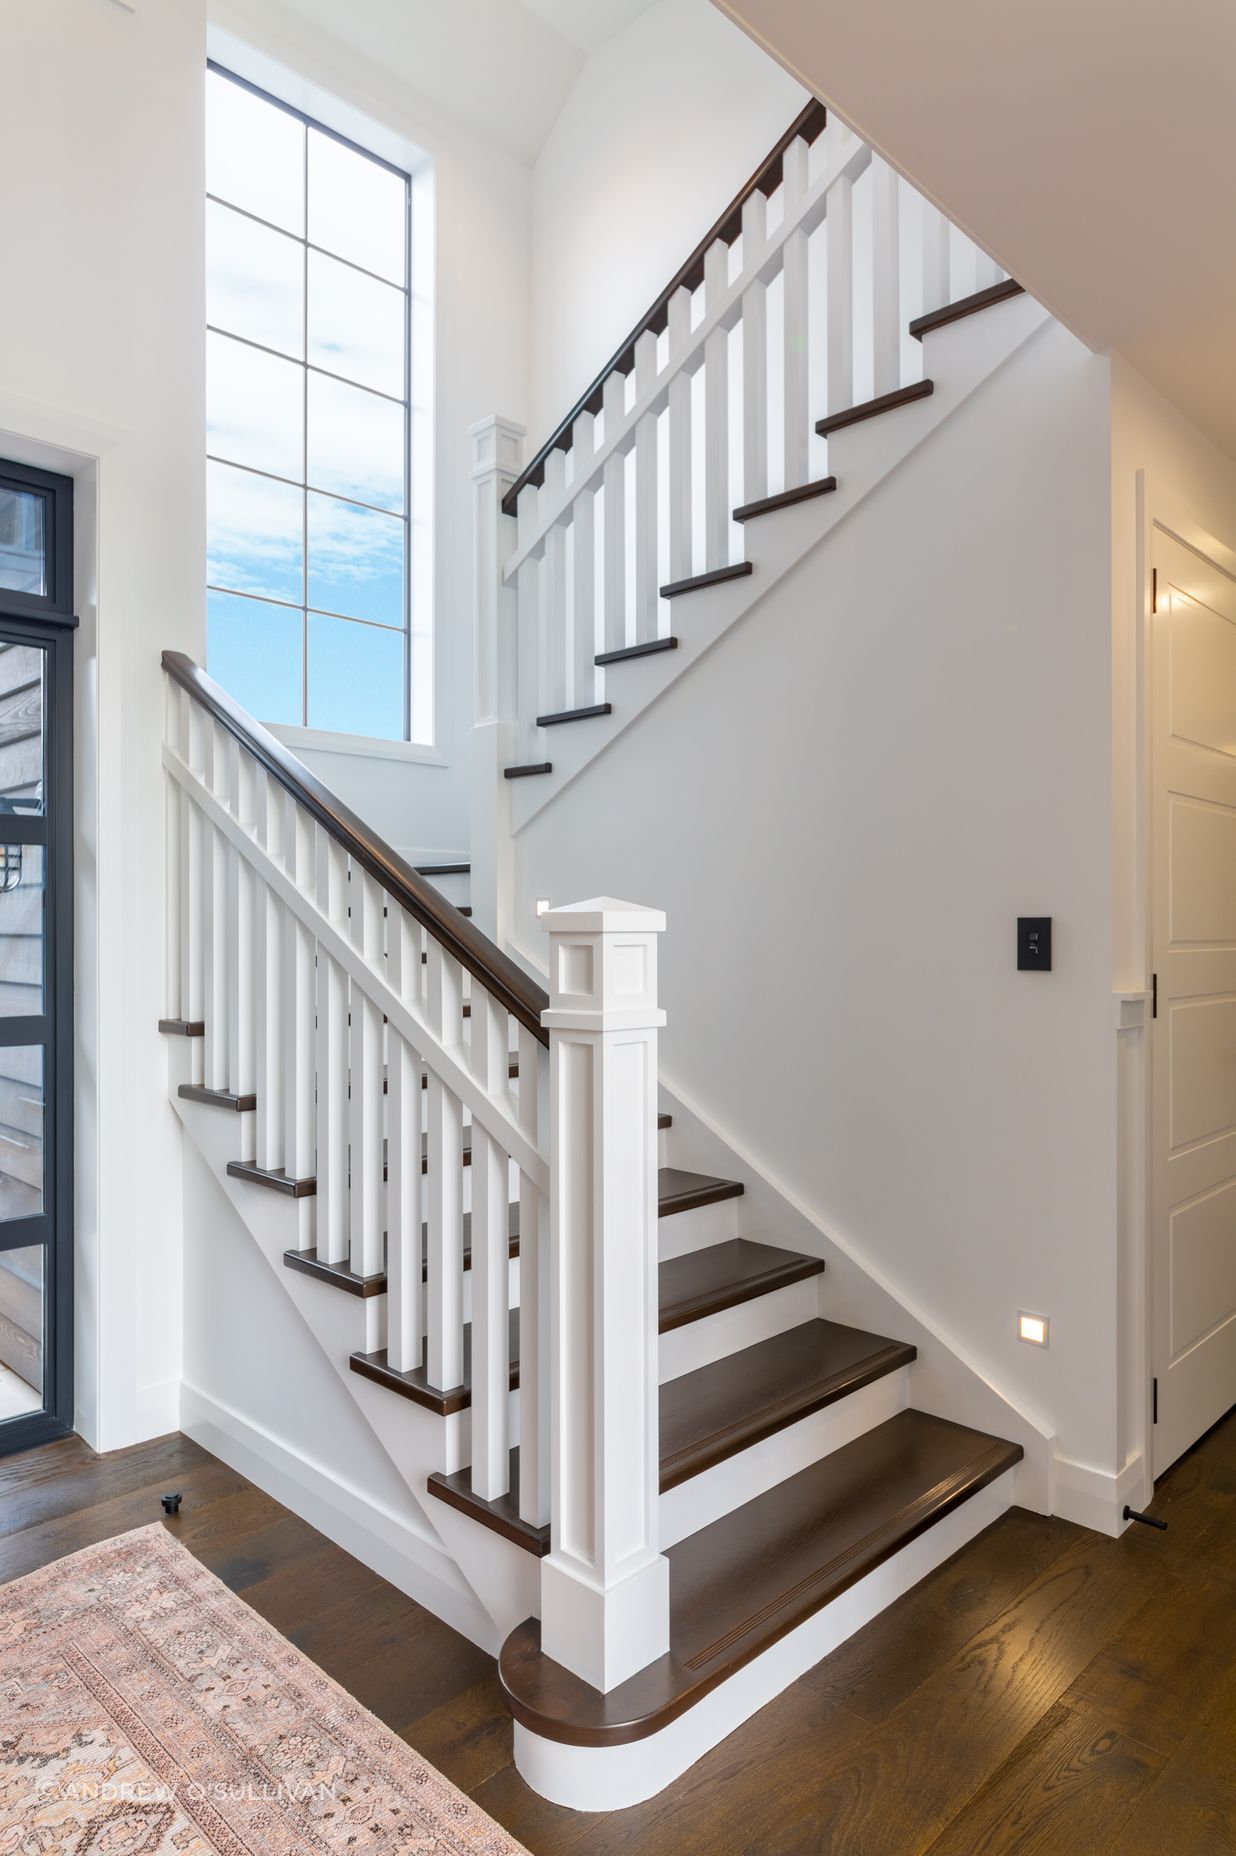 The stunning staircase with traditional newell post detail and oak treads is a beauty to behold, and fits in seamlessly with the engineered timber floors and character detailing.